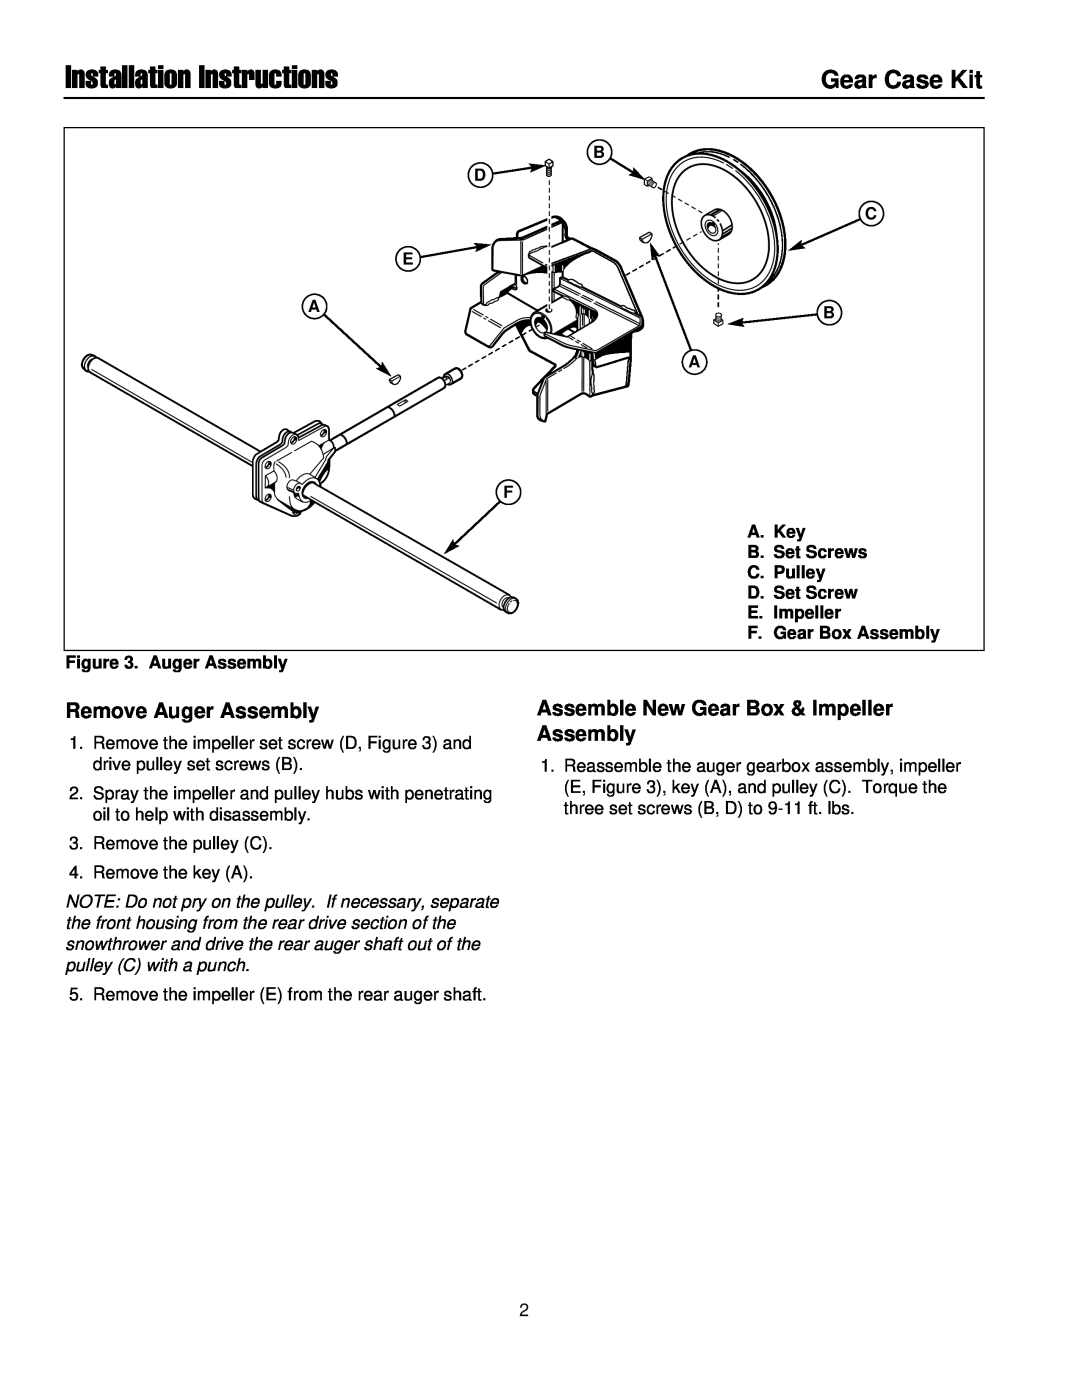 Briggs & Stratton 1687227, 1687228 installation instructions Installation Instructions, Gear Case Kit, Remove Auger Assembly 